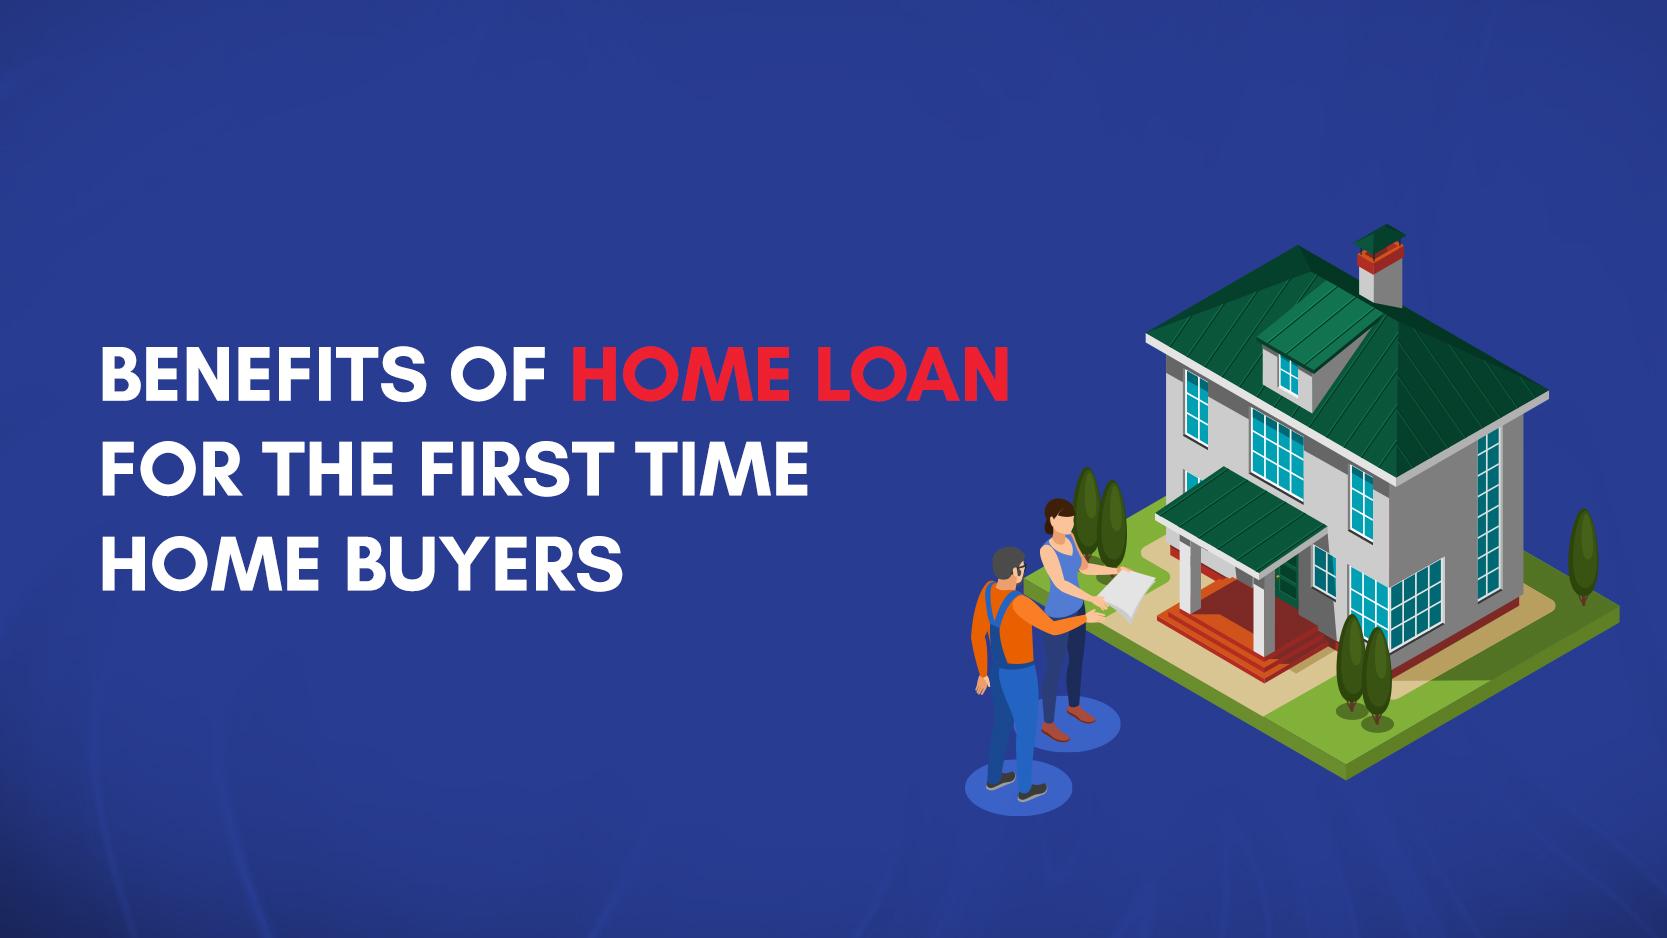 Benefits of Home Loan for the First Time Home Buyers